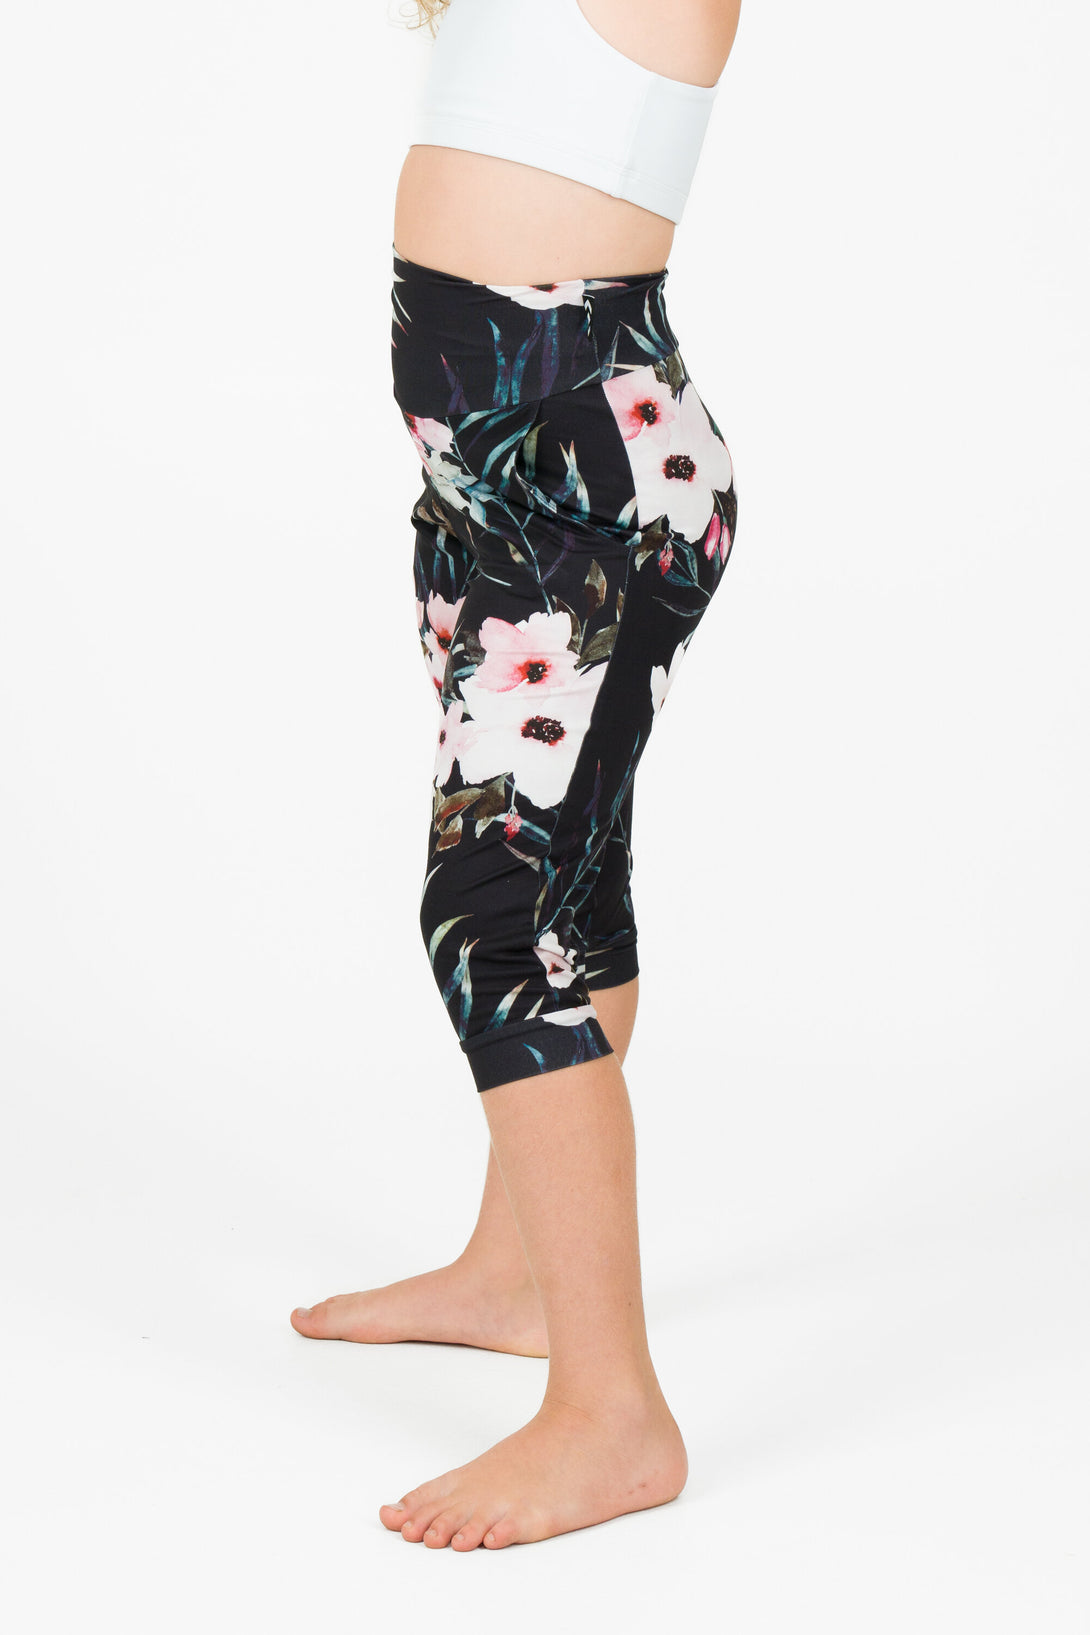 Exotic At Heart Soft to Touch - Kids Jogger Capris - Exoticathletica